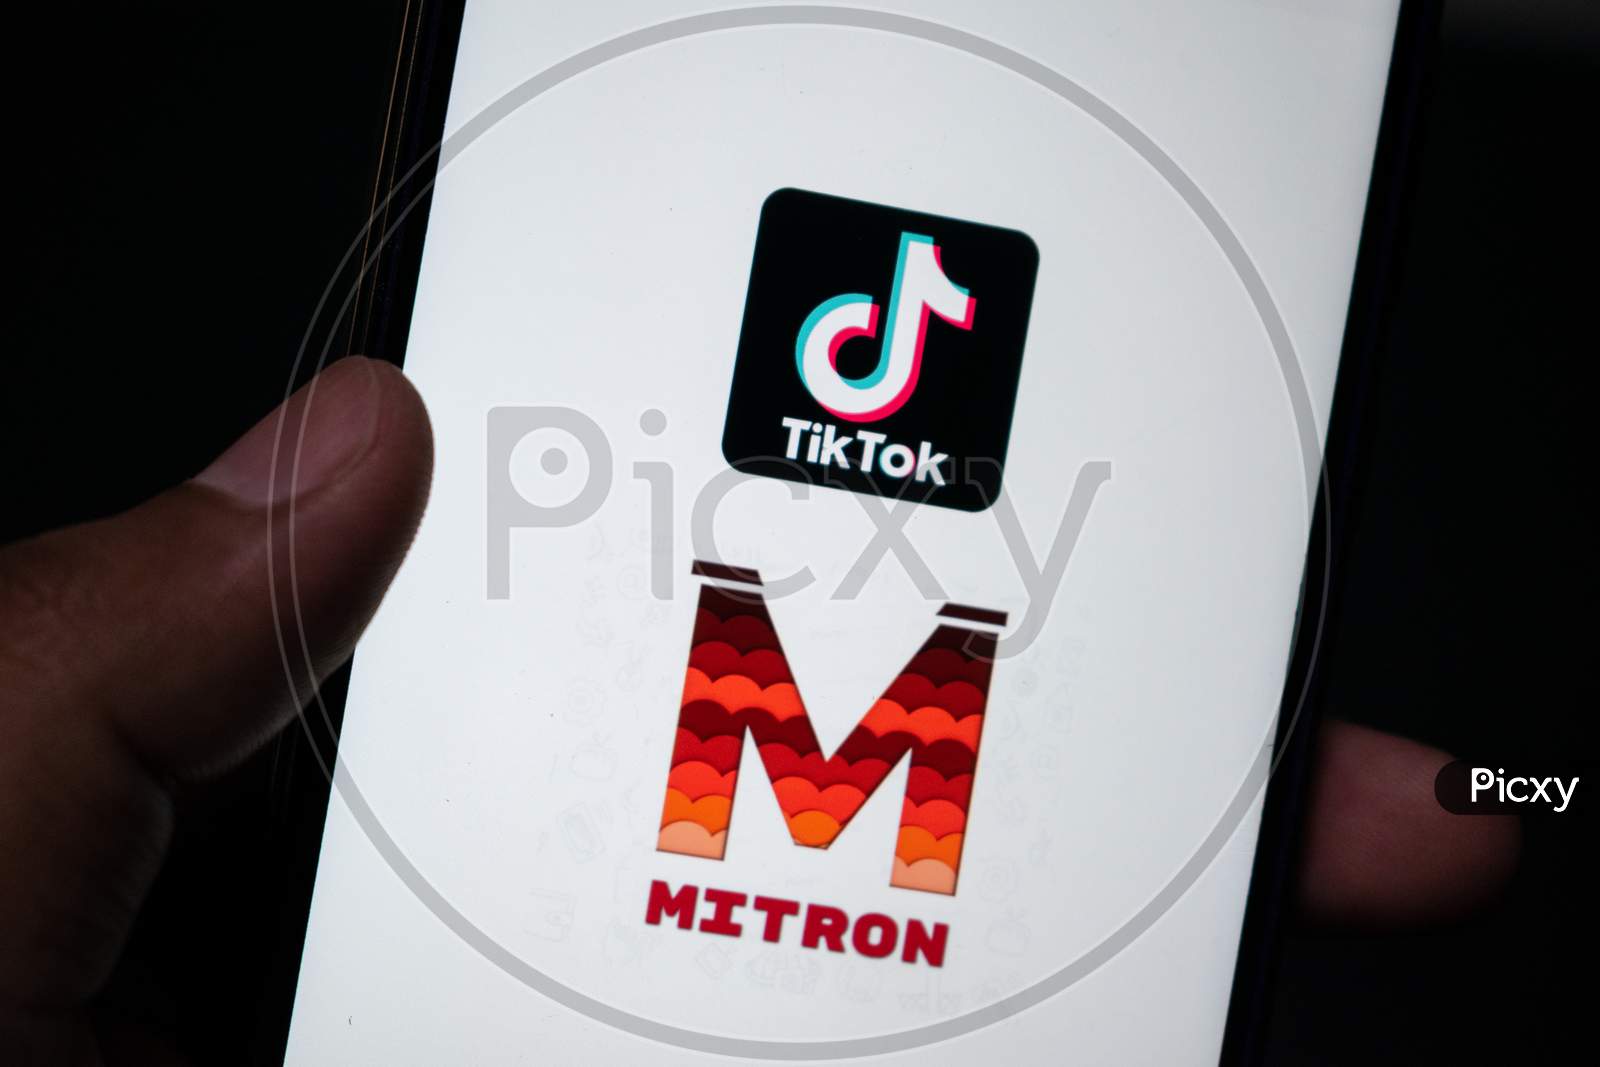 Mitron application and Chinese application tiktok logo on a phone. Both applications are video content creation applications